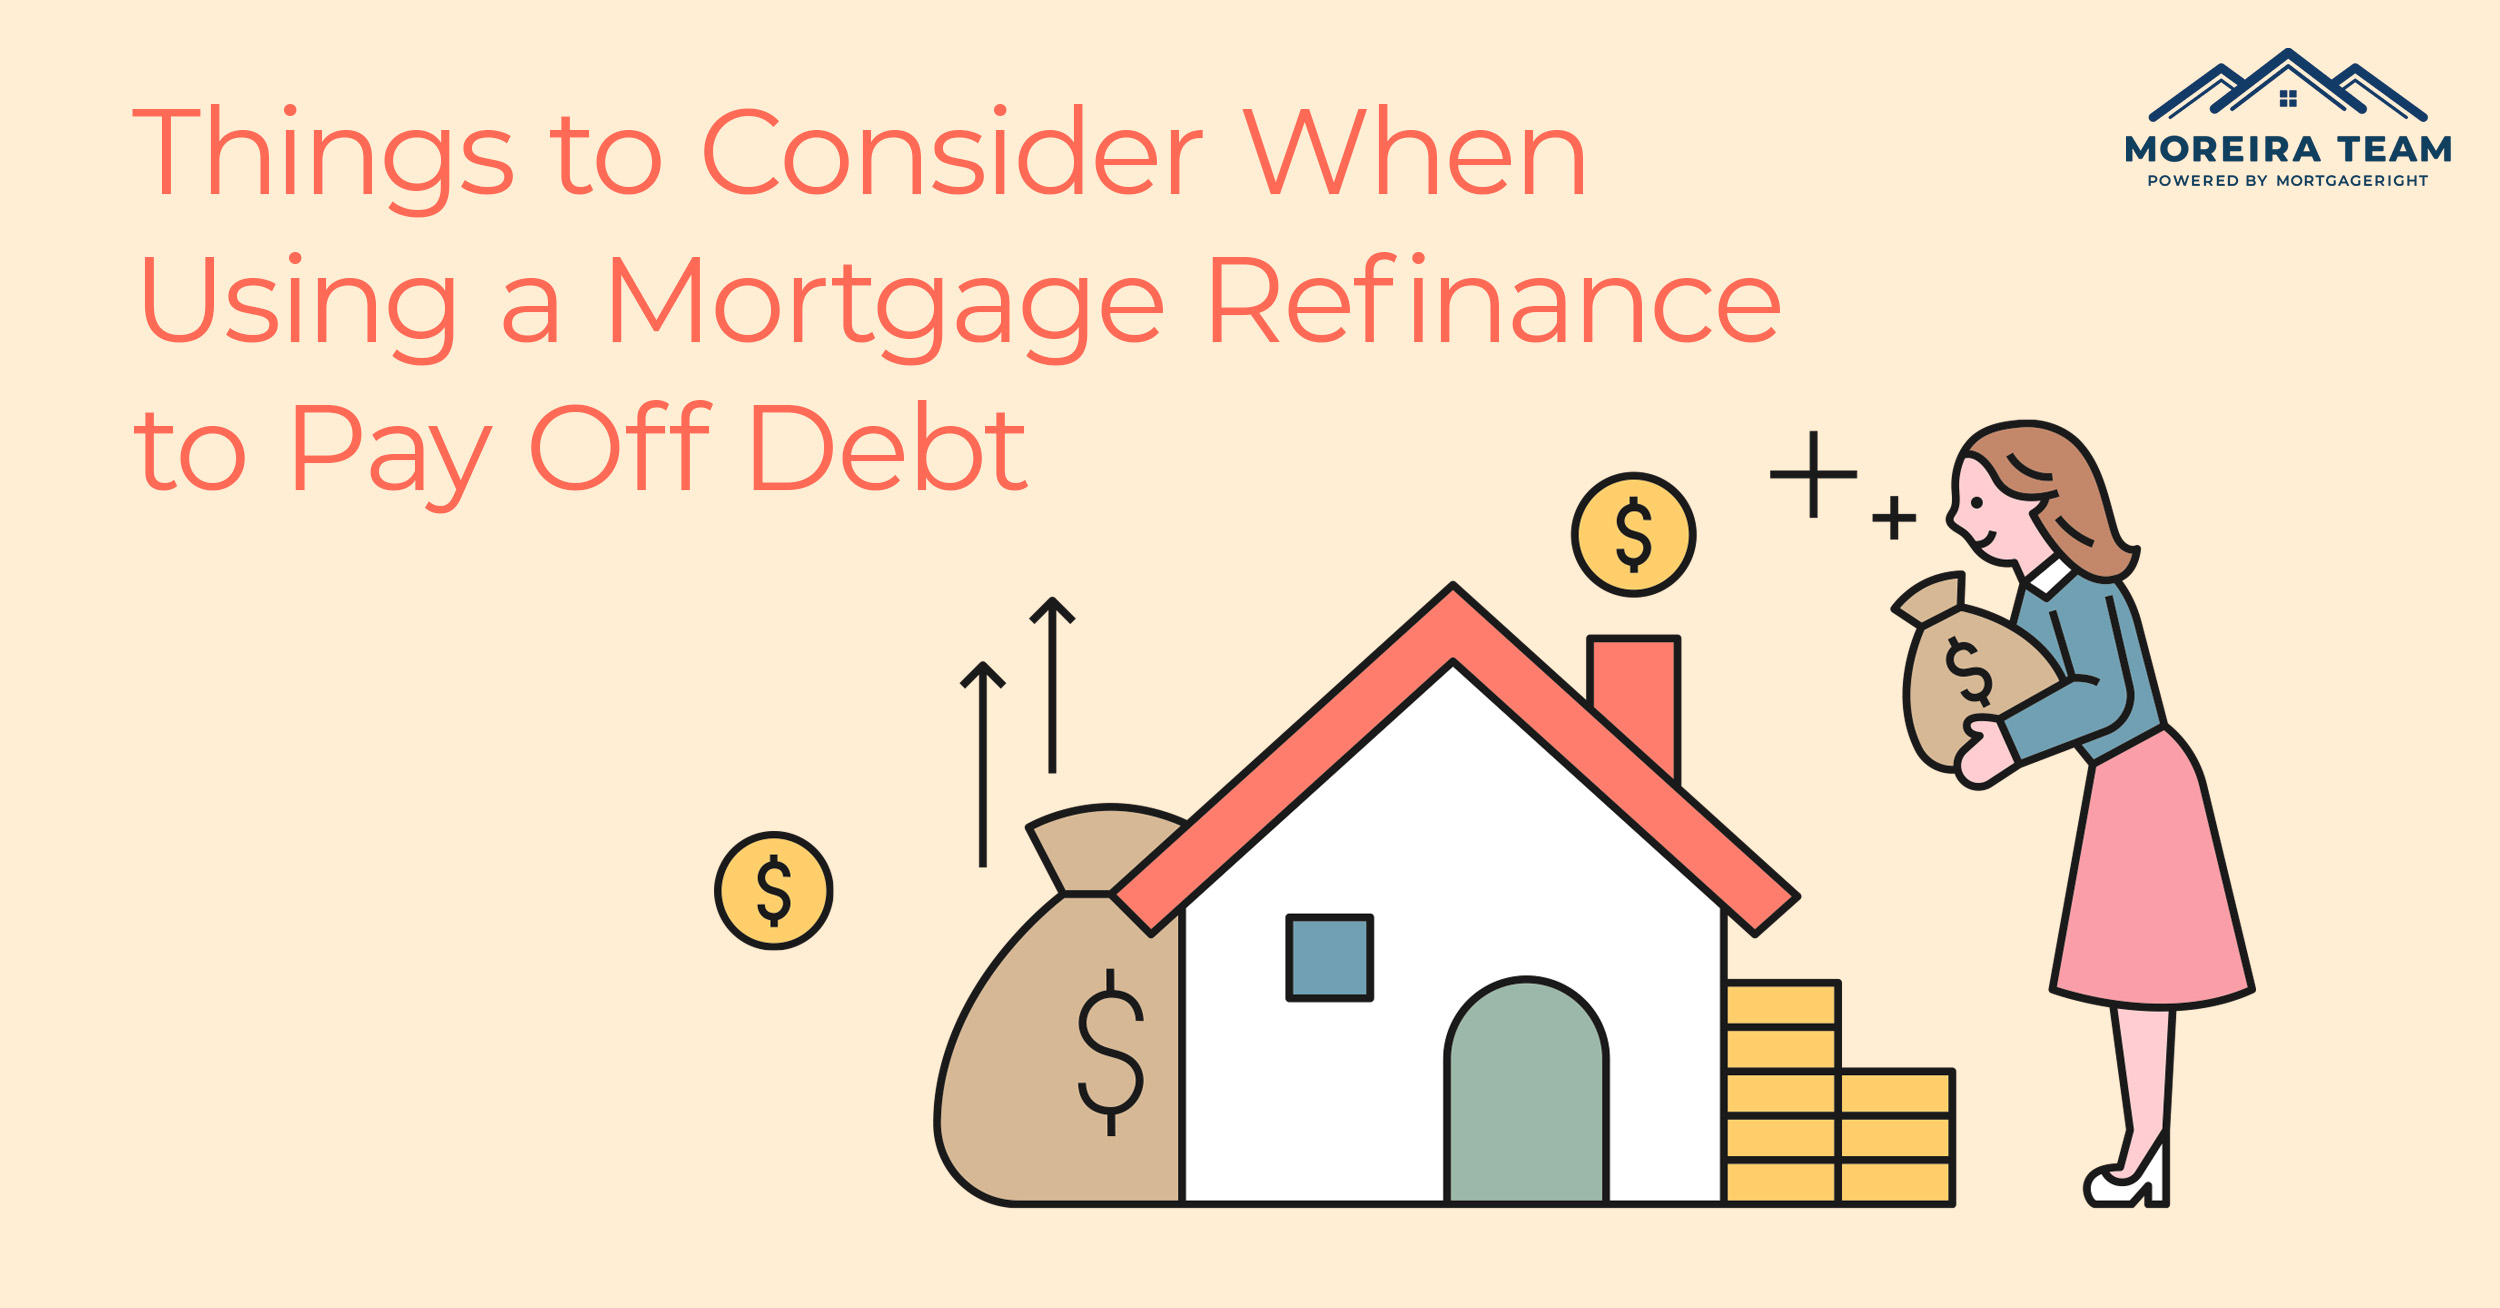 Things to Consider When Using a Mortgage Refinance to Pay Off Debt